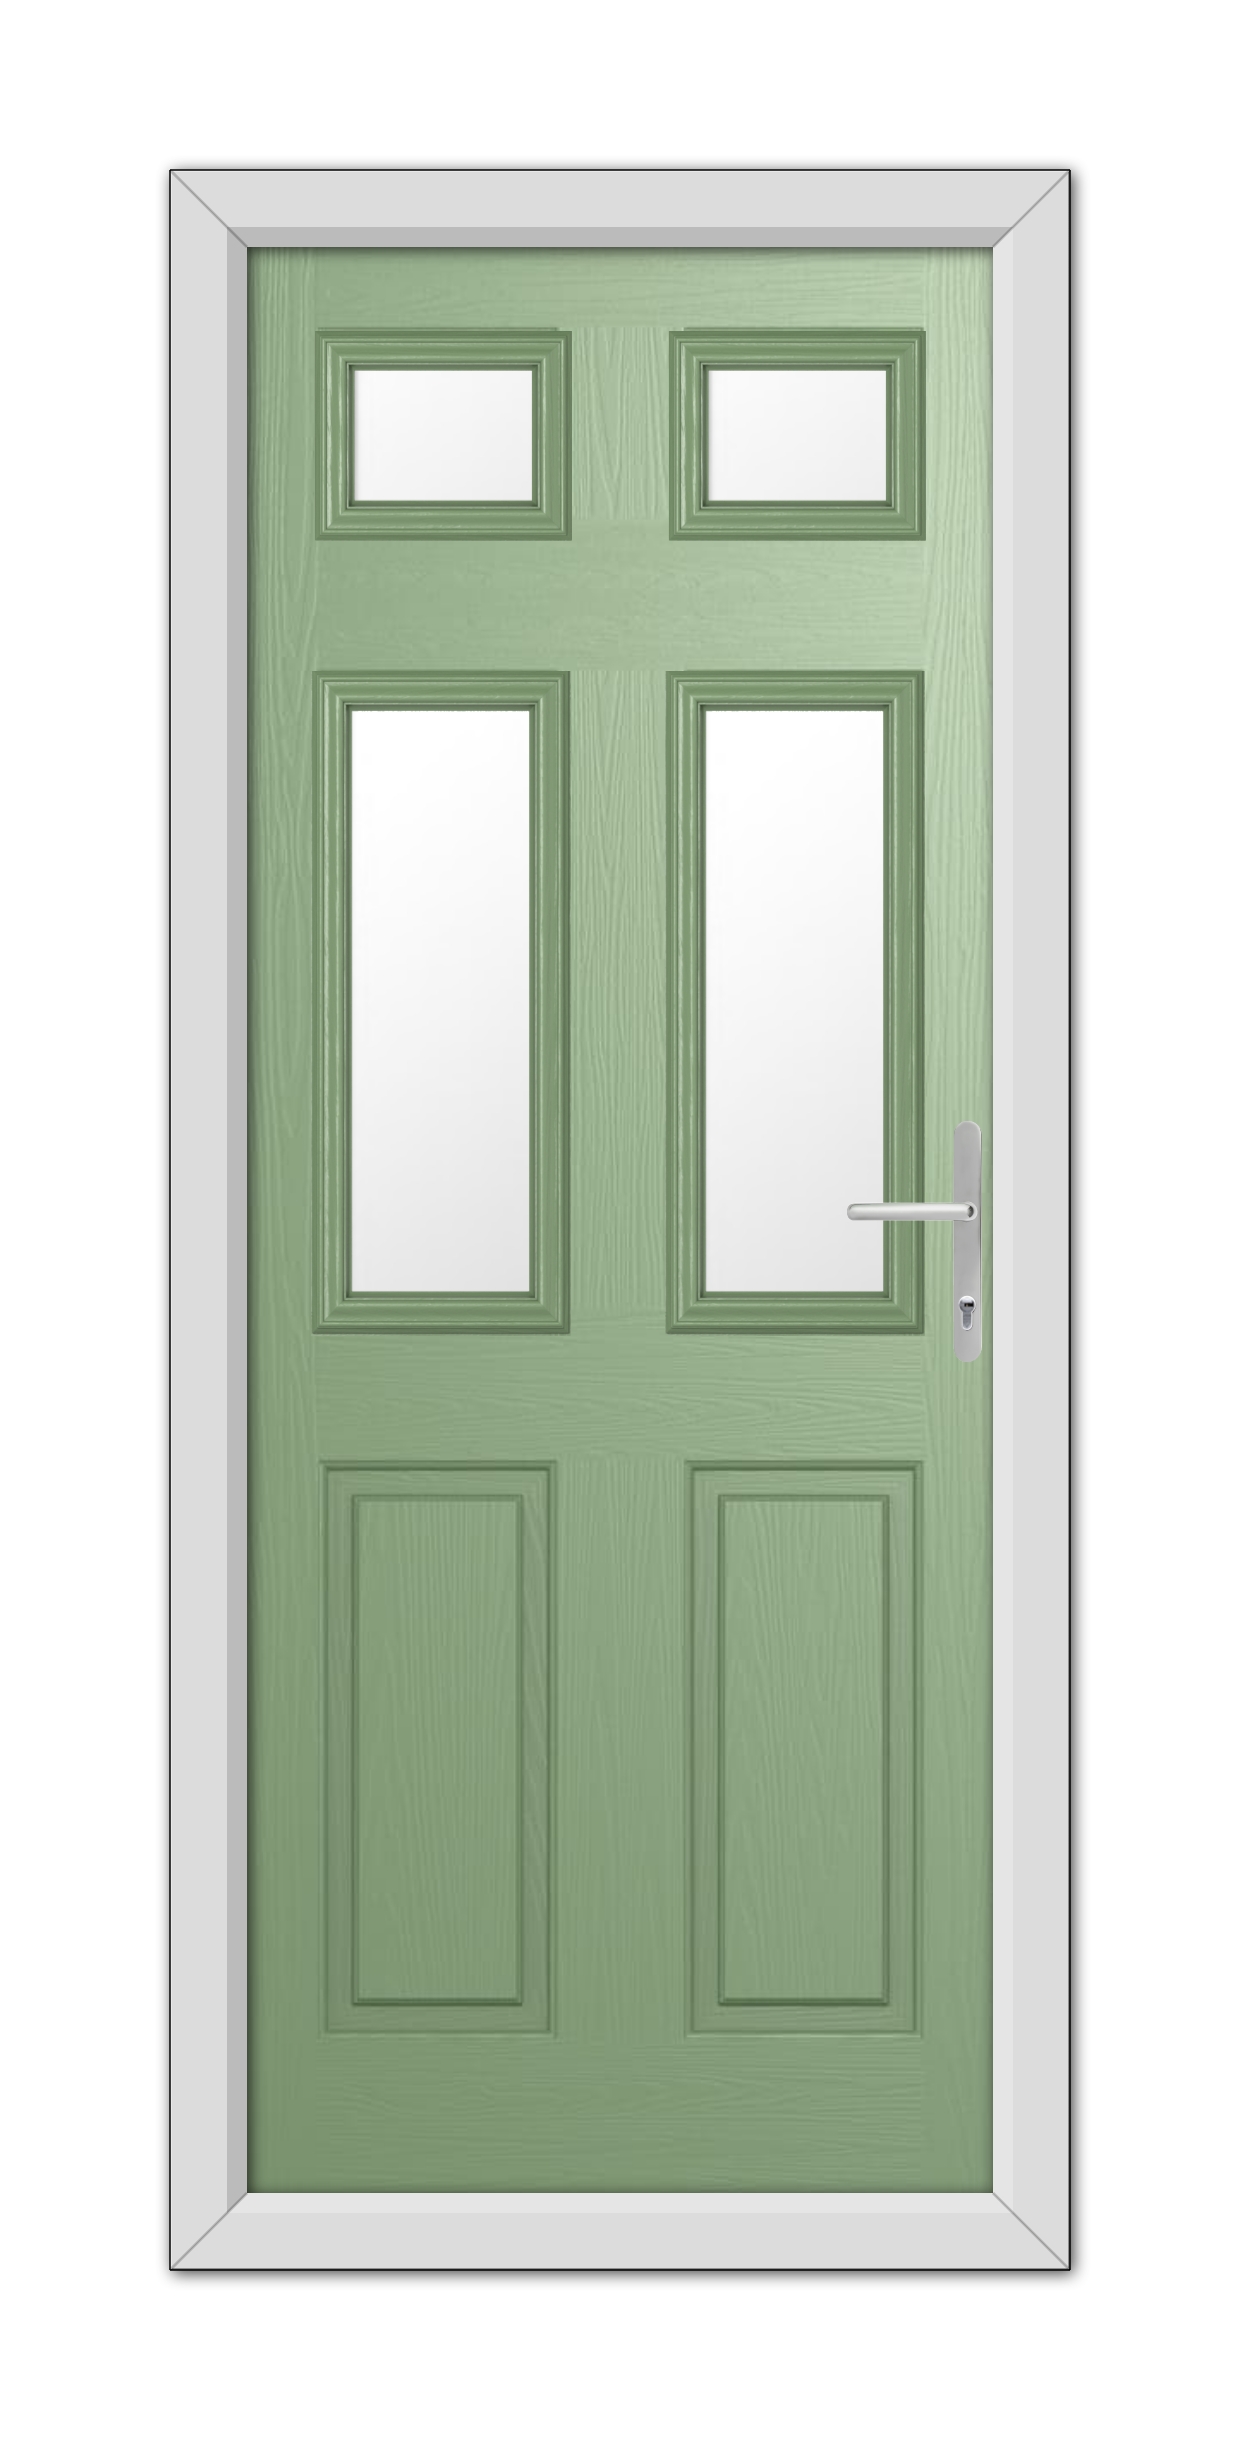 A Chartwell Green Middleton Glazed 4 Composite Door 48mm Timber Core featuring four symmetrical glass panels and a modern handle, set within a white frame.